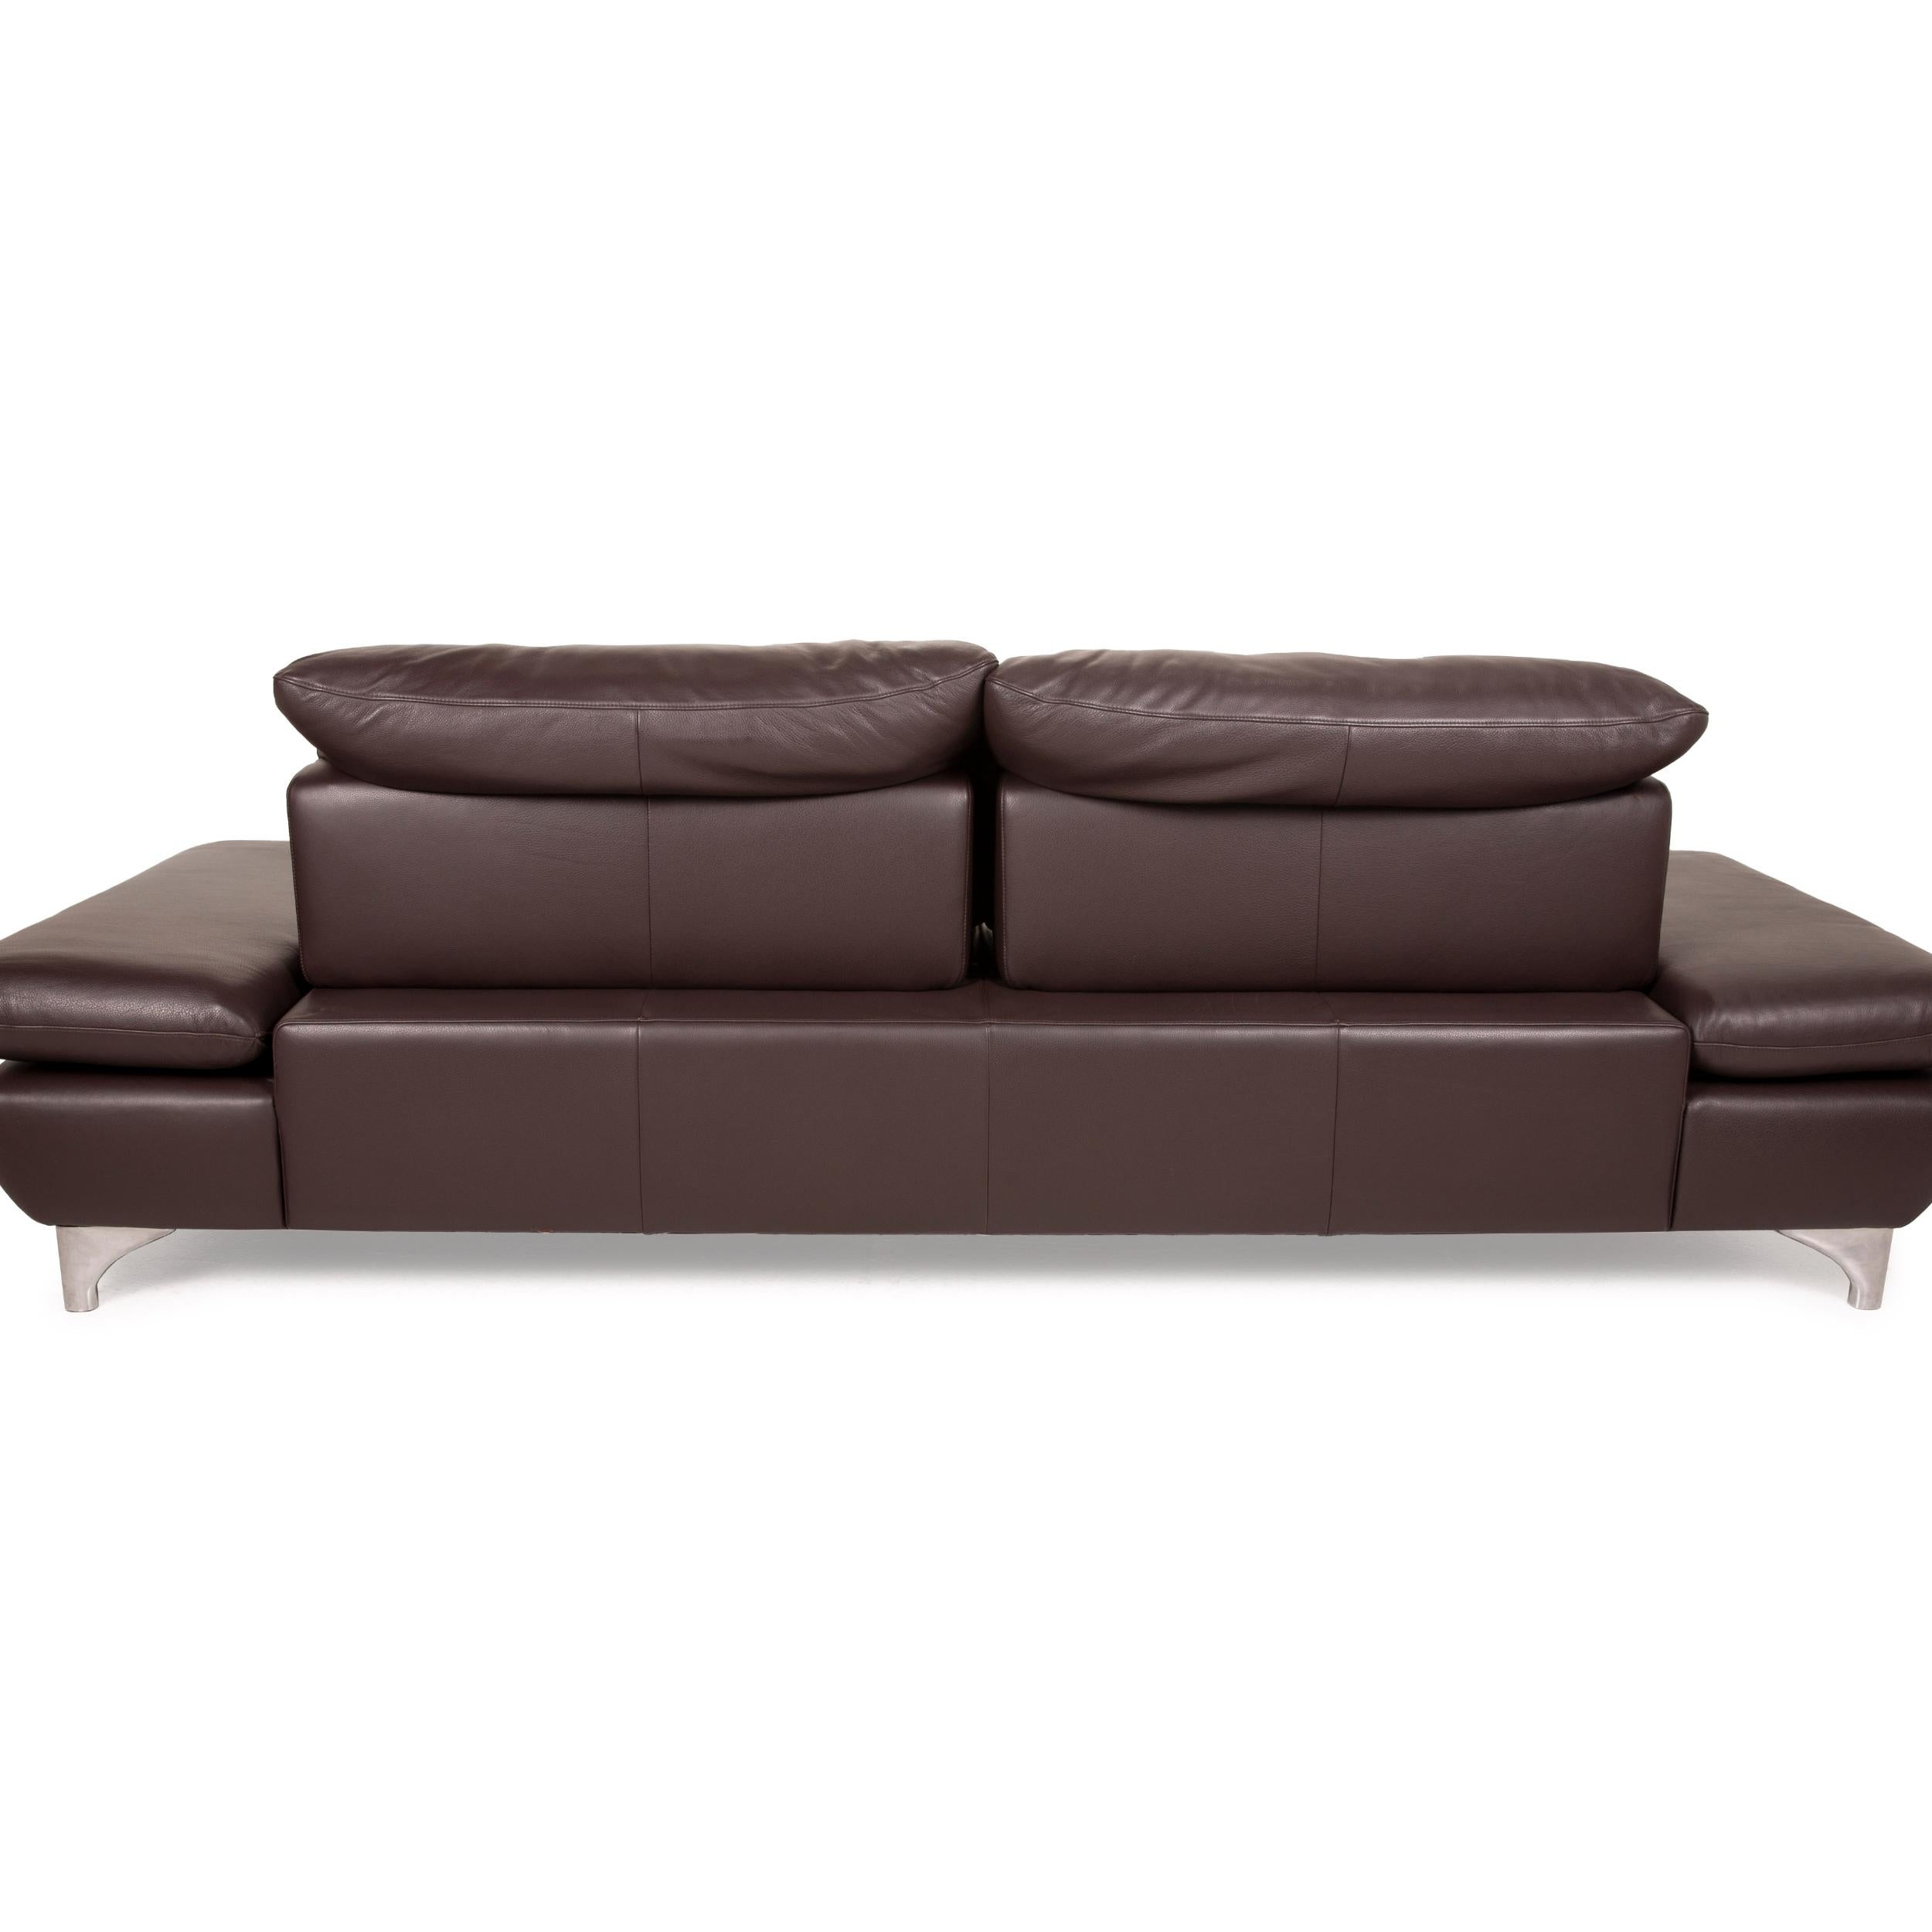 Willi Schillig Taoo Leather Sofa Brown Three-Seater Sofa Function Couch Dark For Sale 1